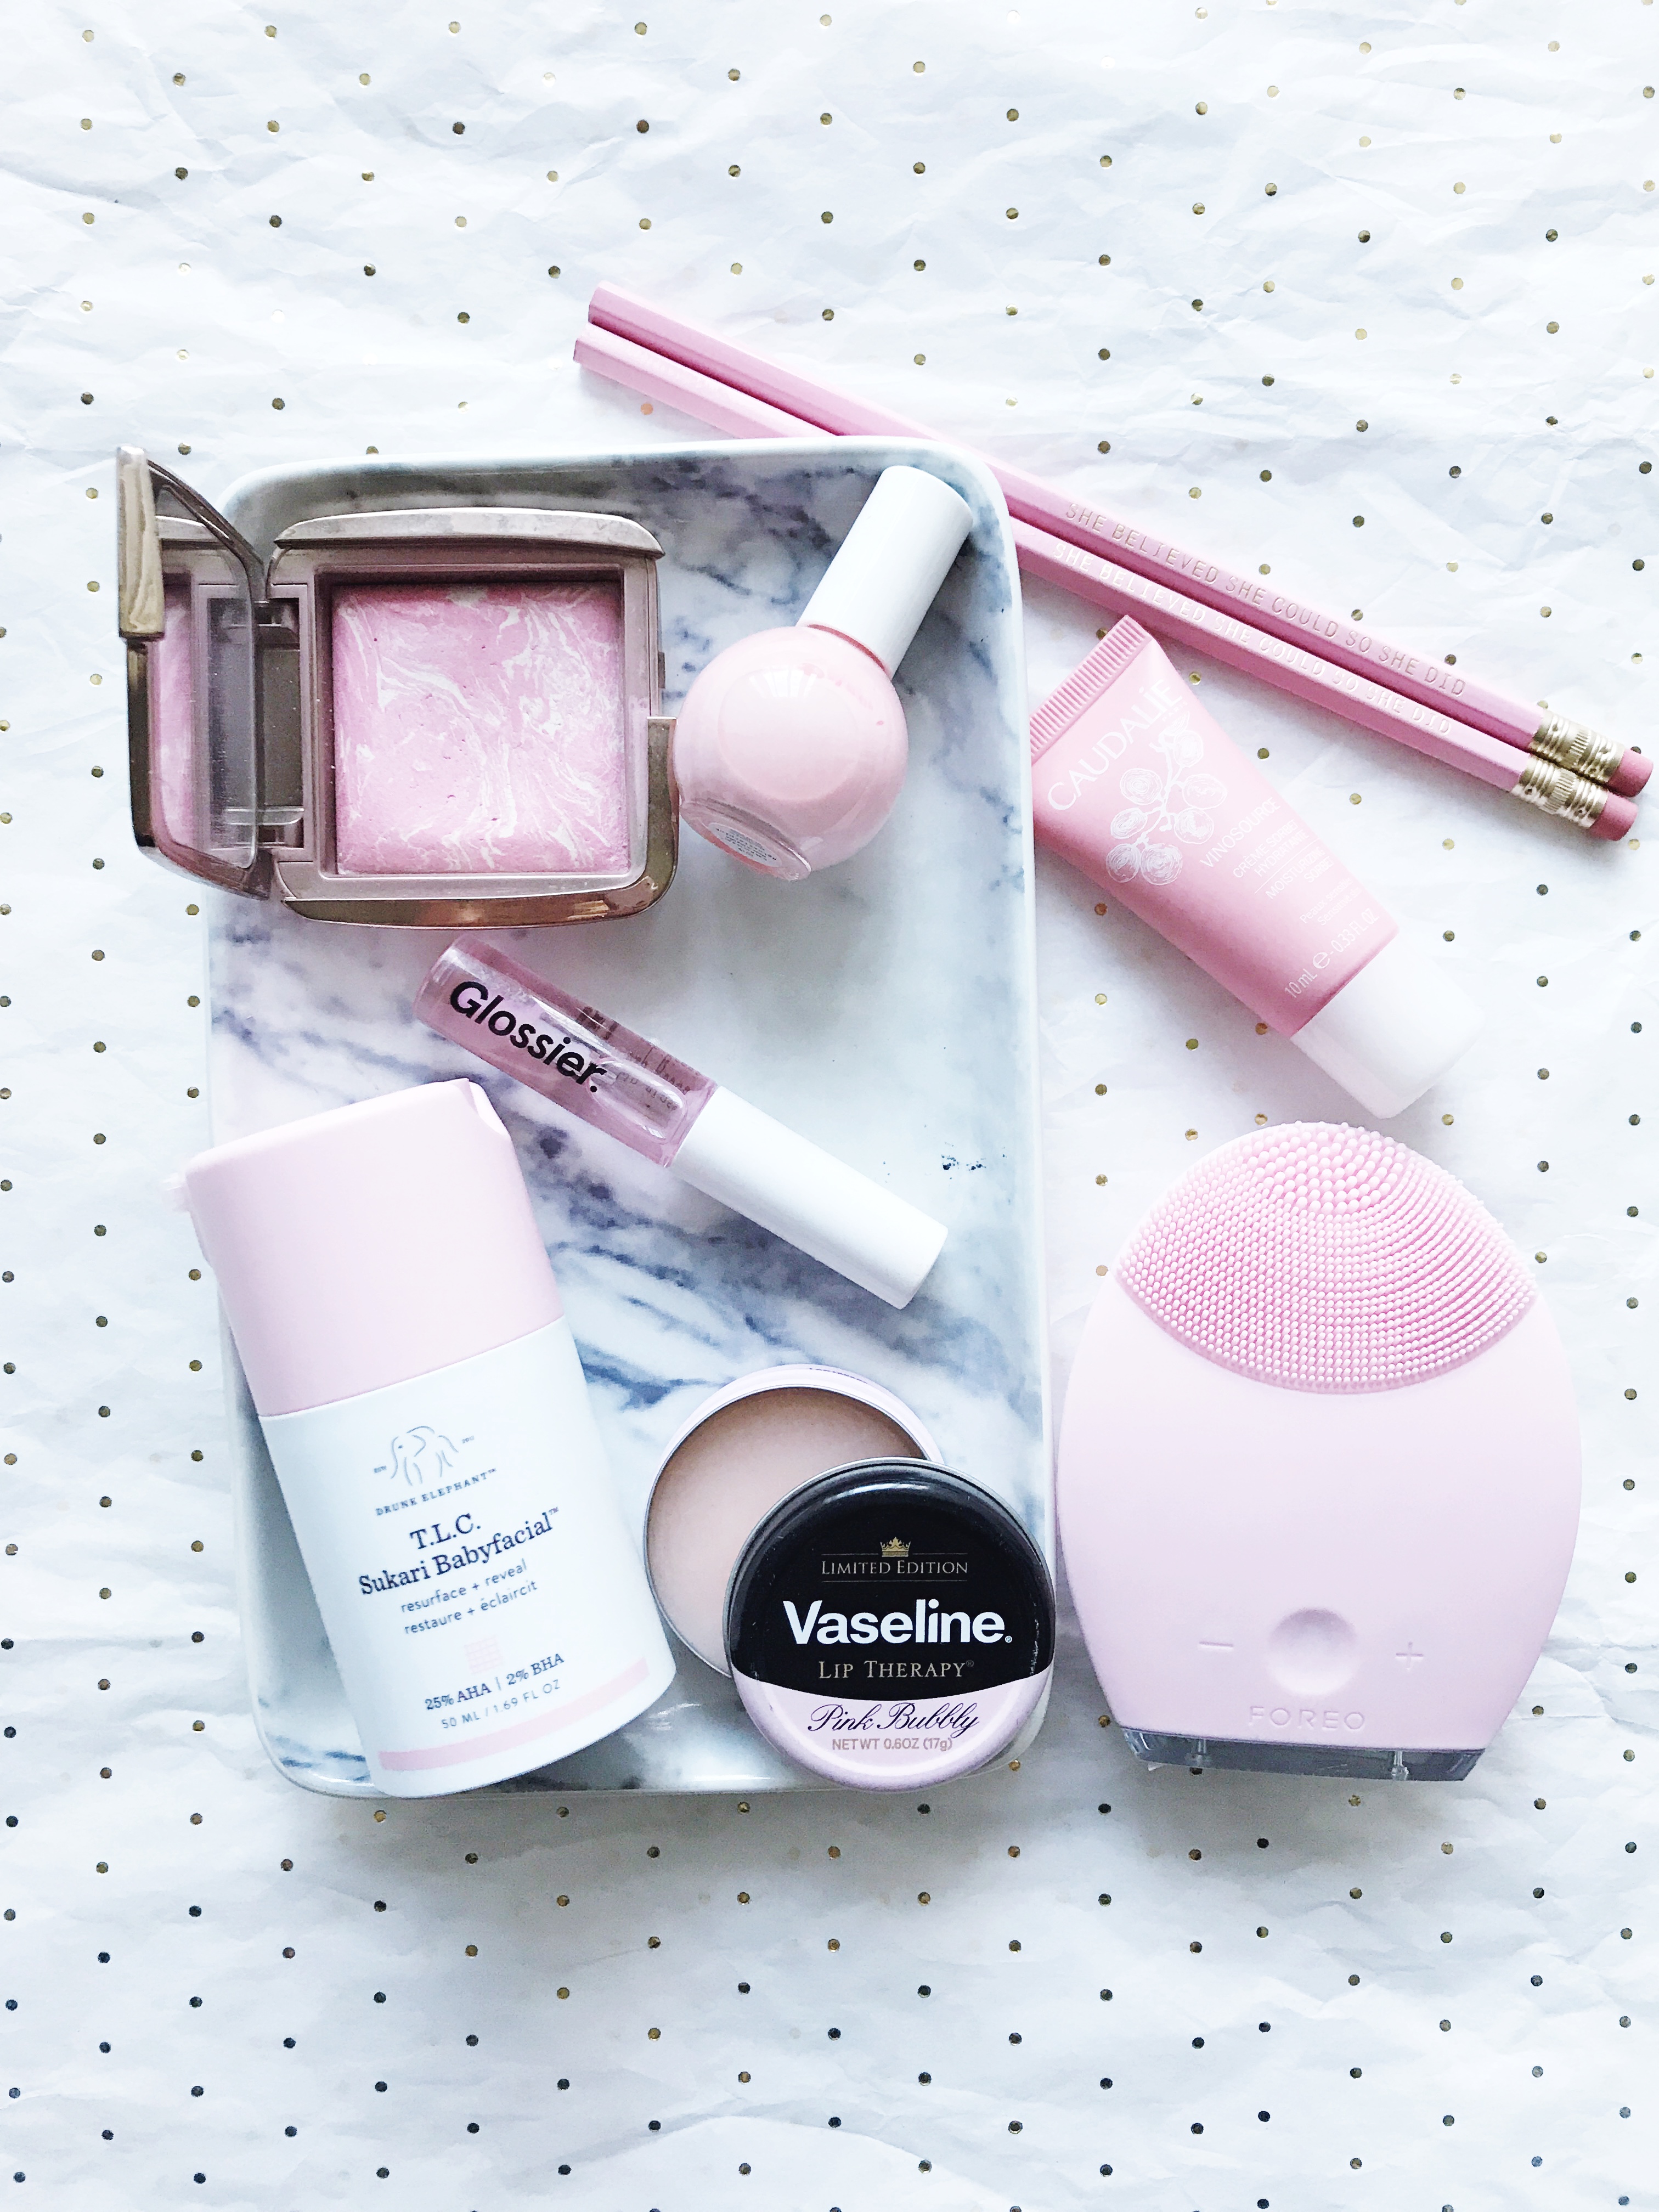 Pin en Shopping ♥: Makeup, Skincare, & Beauty Products